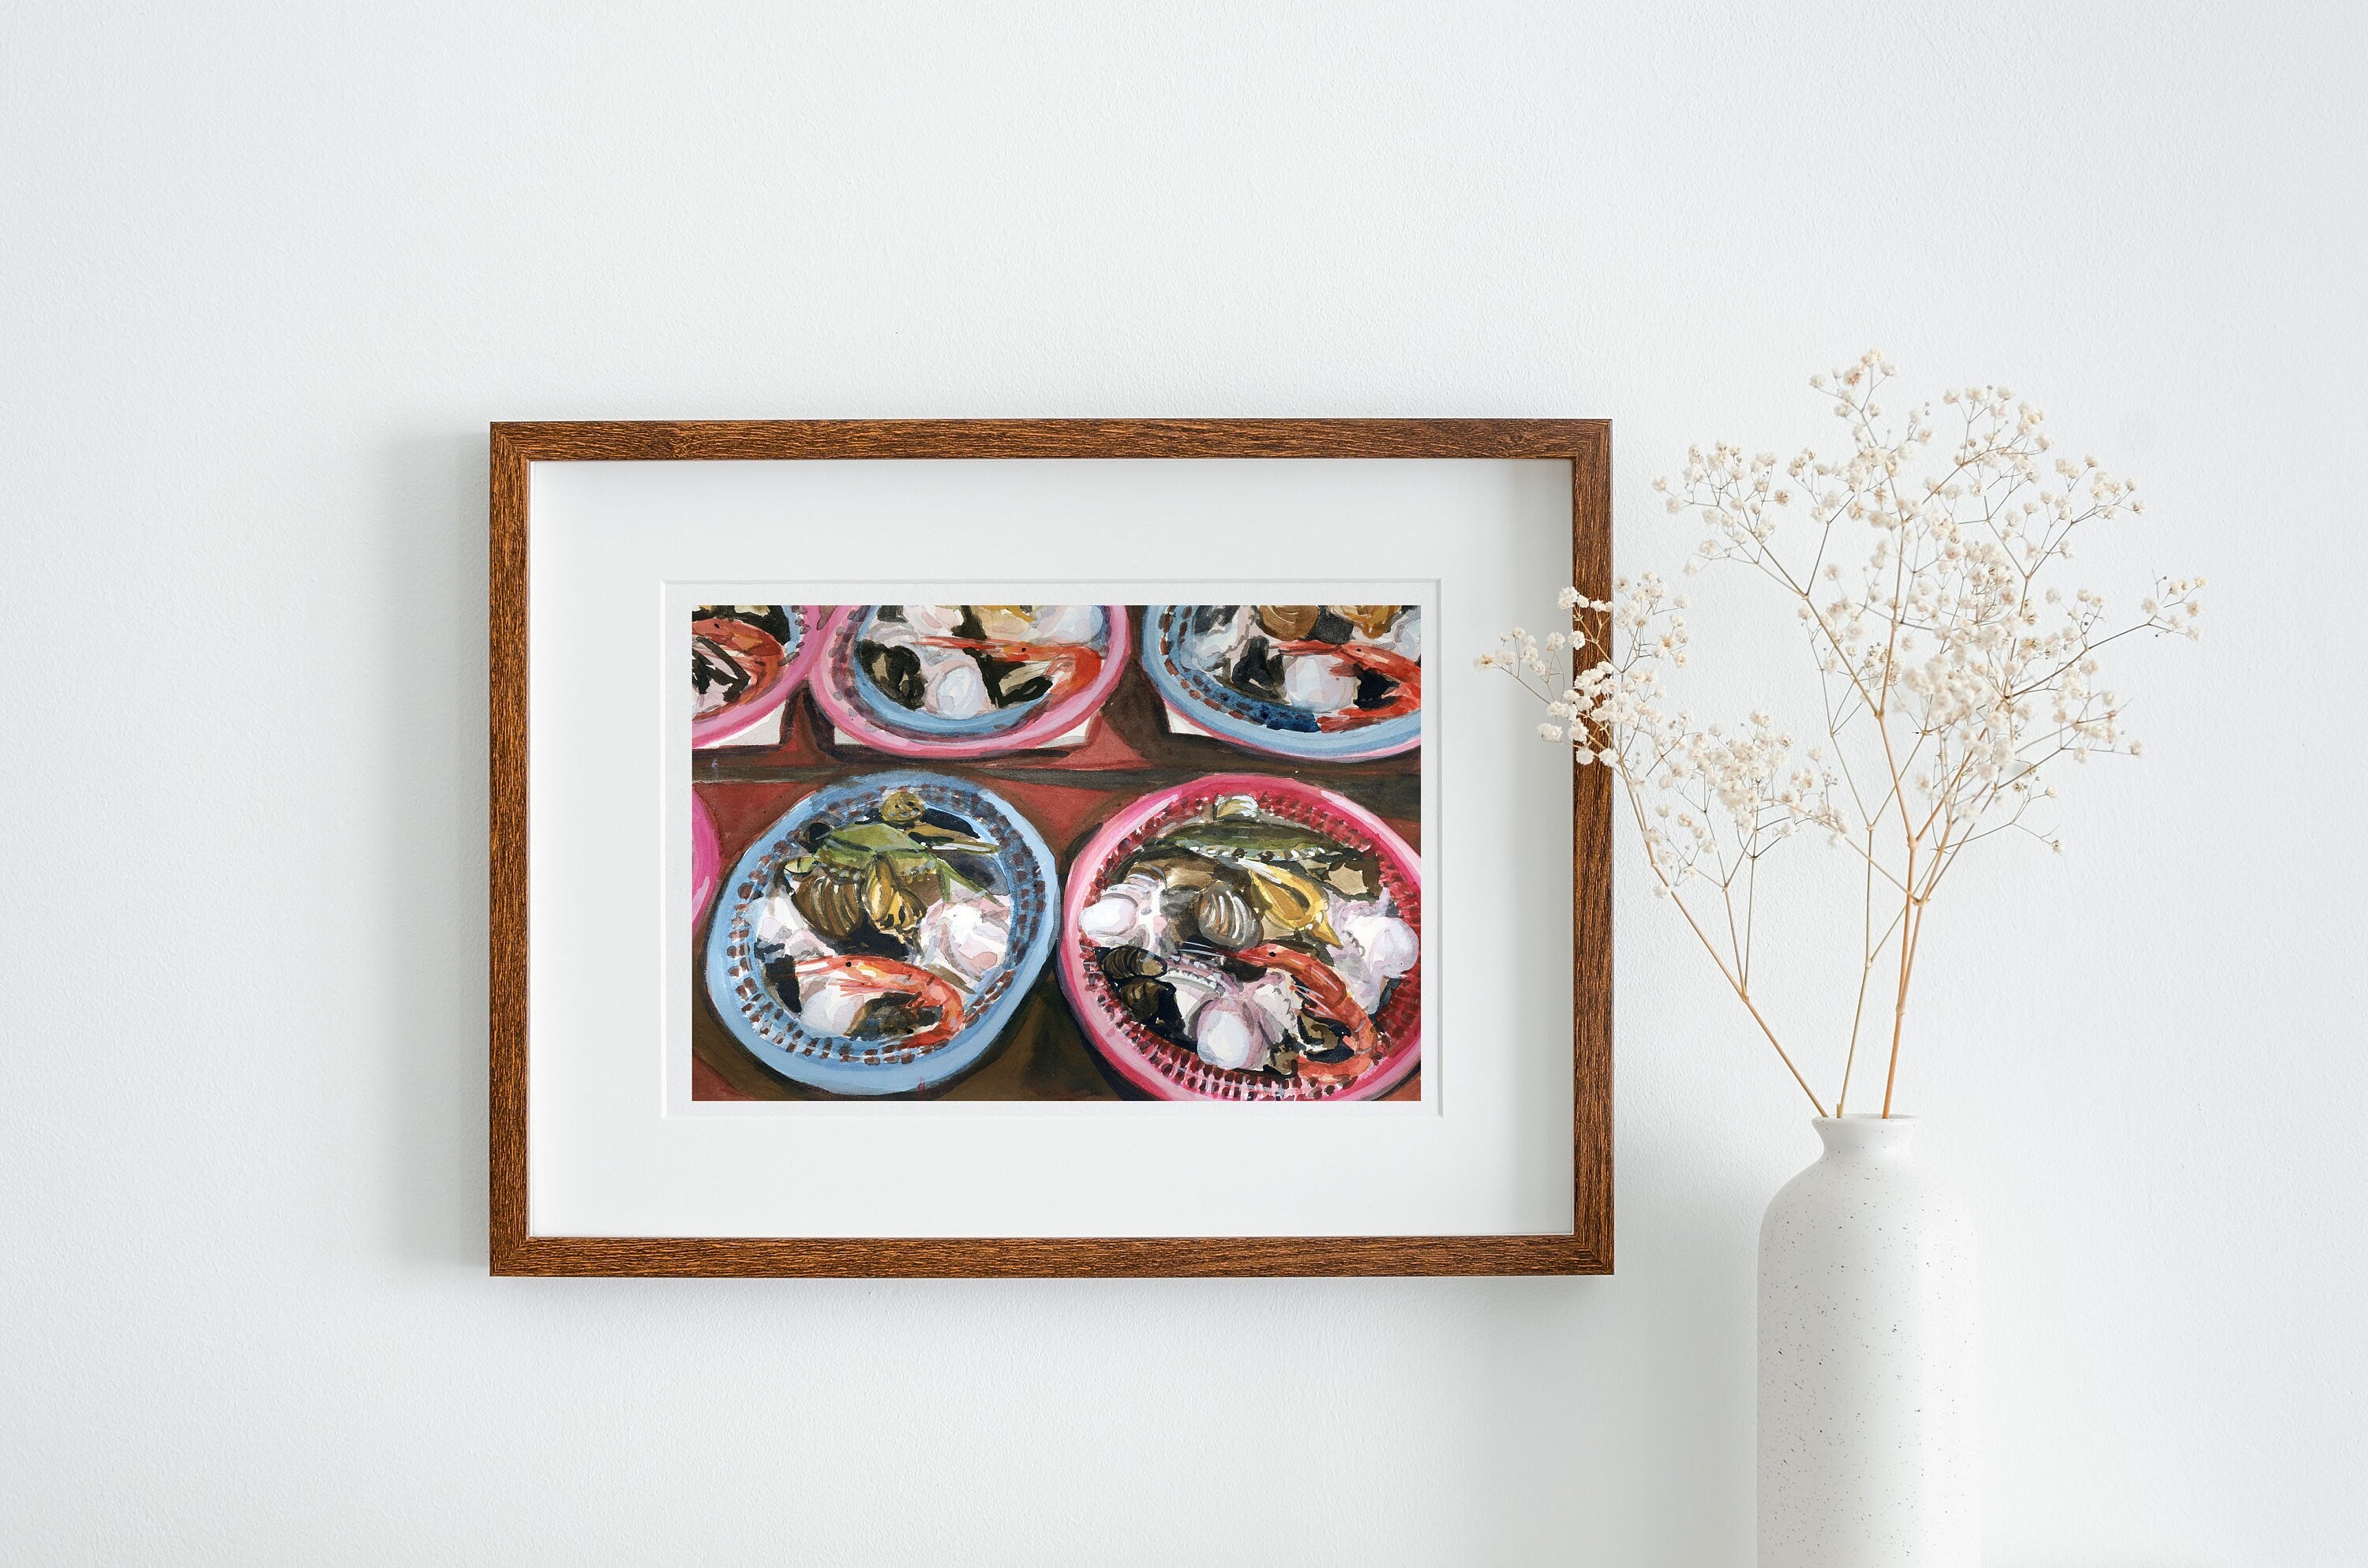 Asian fish market print of painting by Medjool Studio. Print of original gouache painting of an Asian fish market with vibrant coloured plates of different fish and seafood.